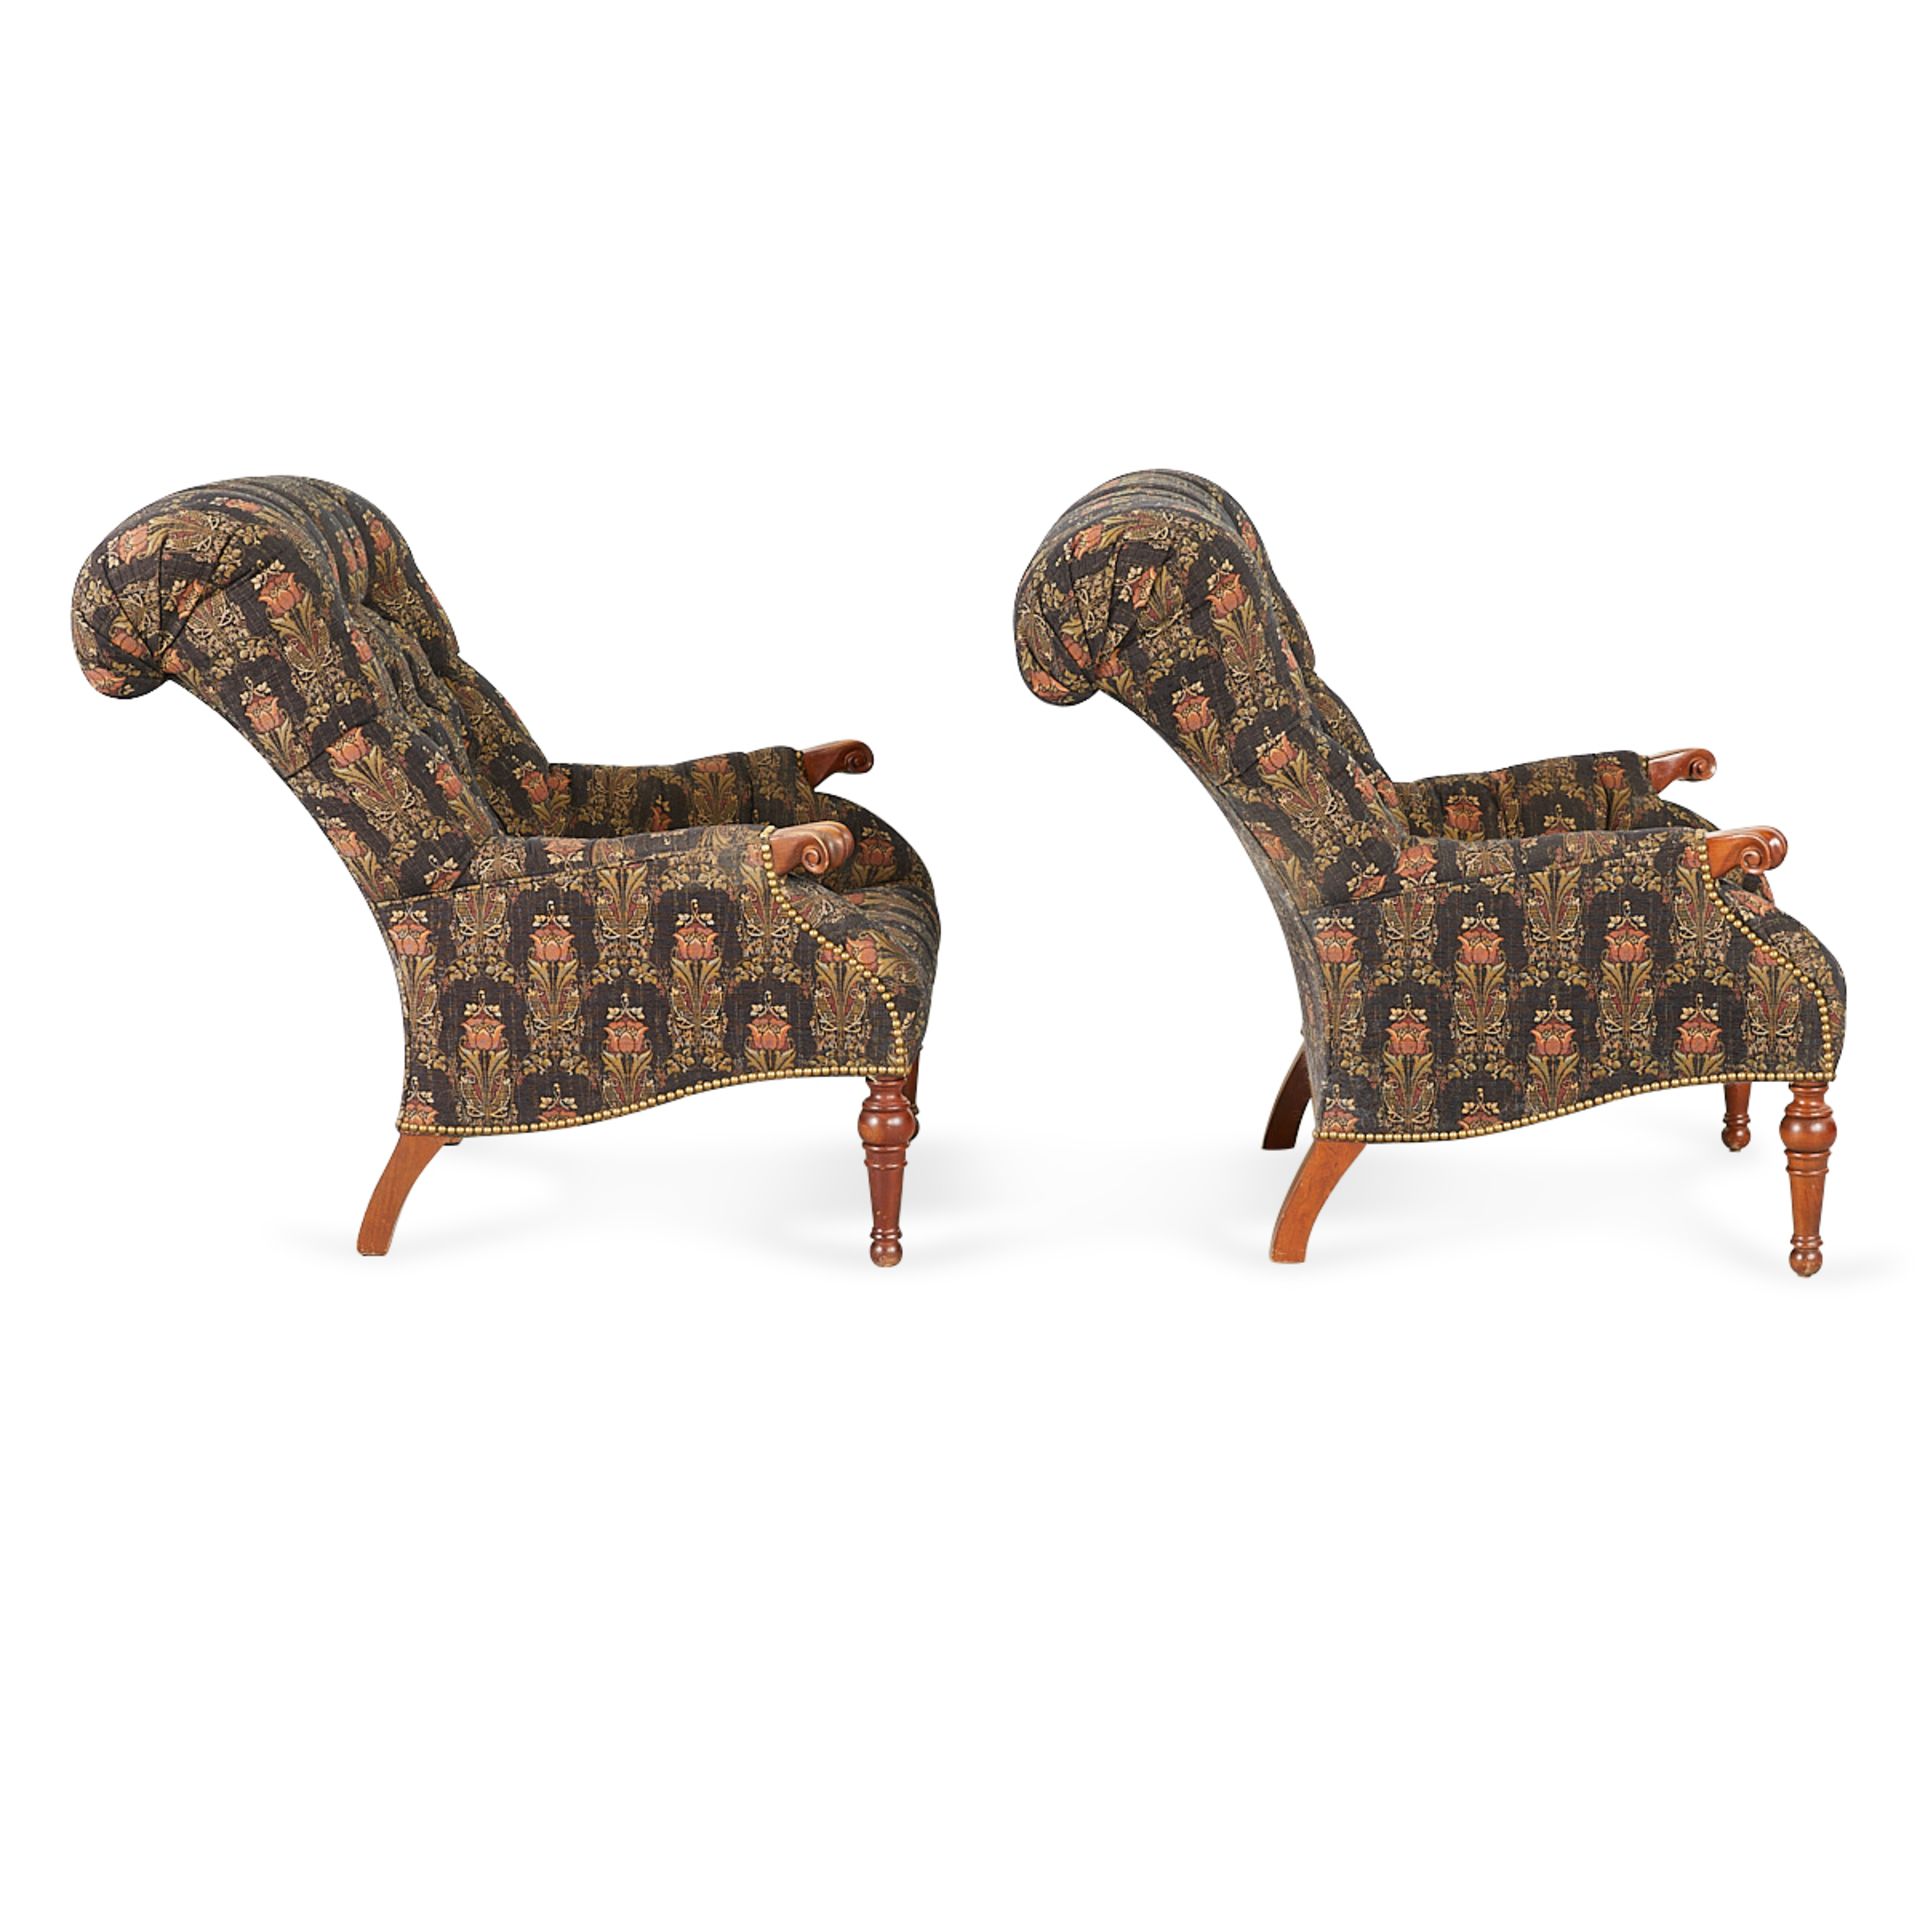 Pair of Stickley Tufted Chairs w/Ottomans - Image 6 of 22